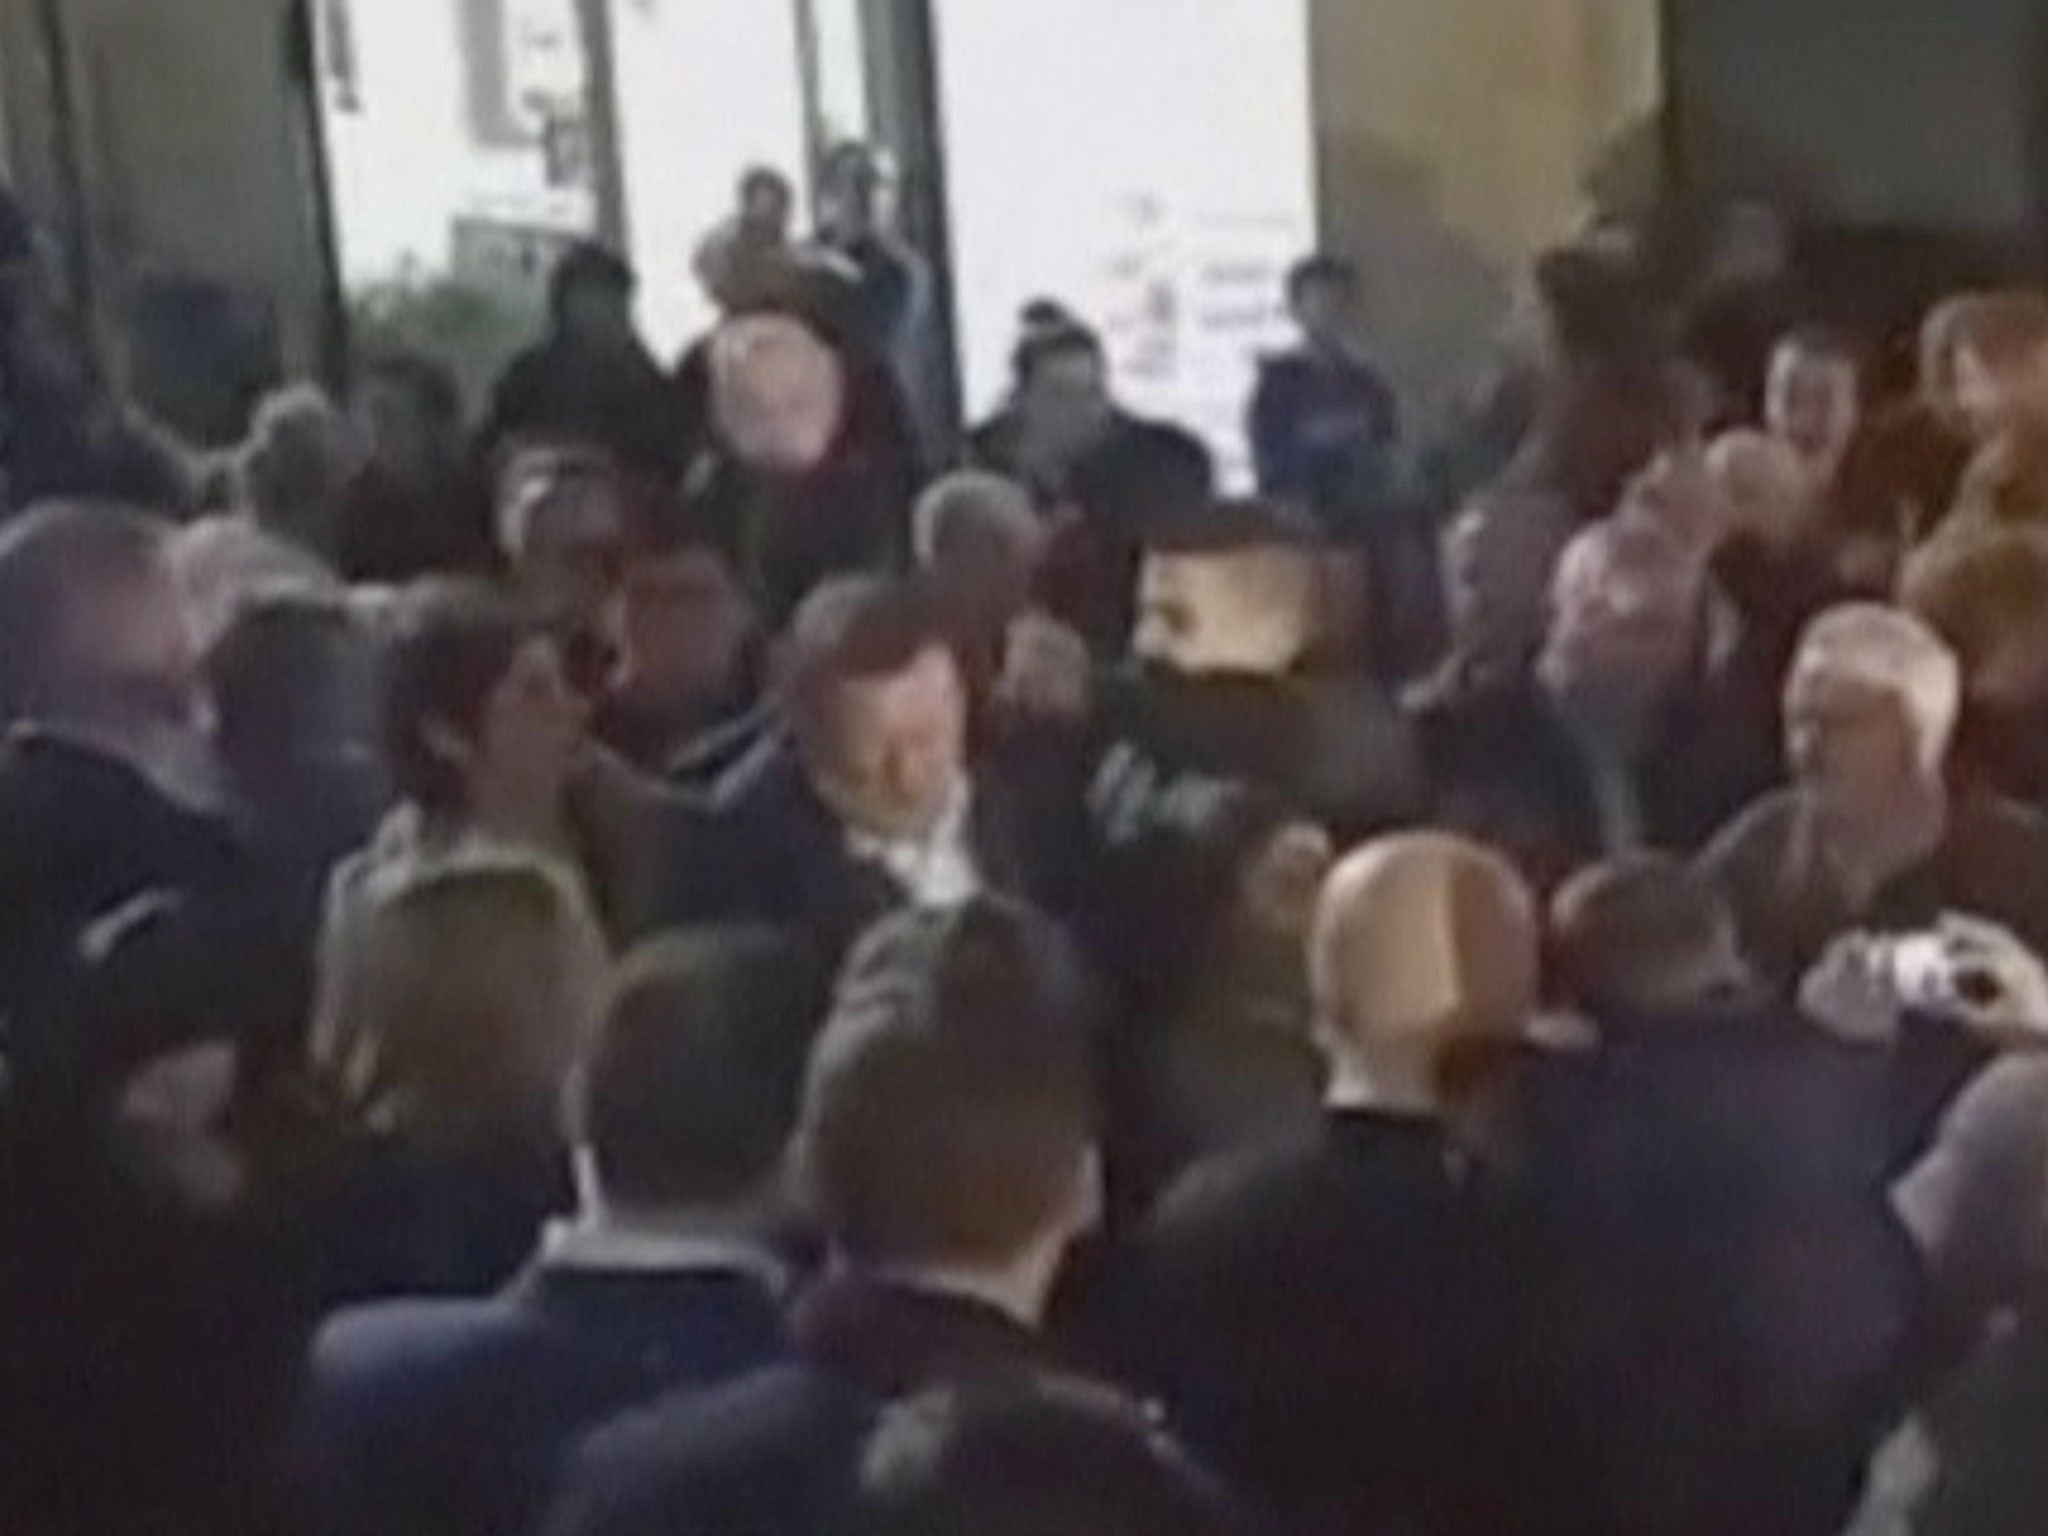 Spanish Prime Minister Mariano Rajoy is punched during a campaign event